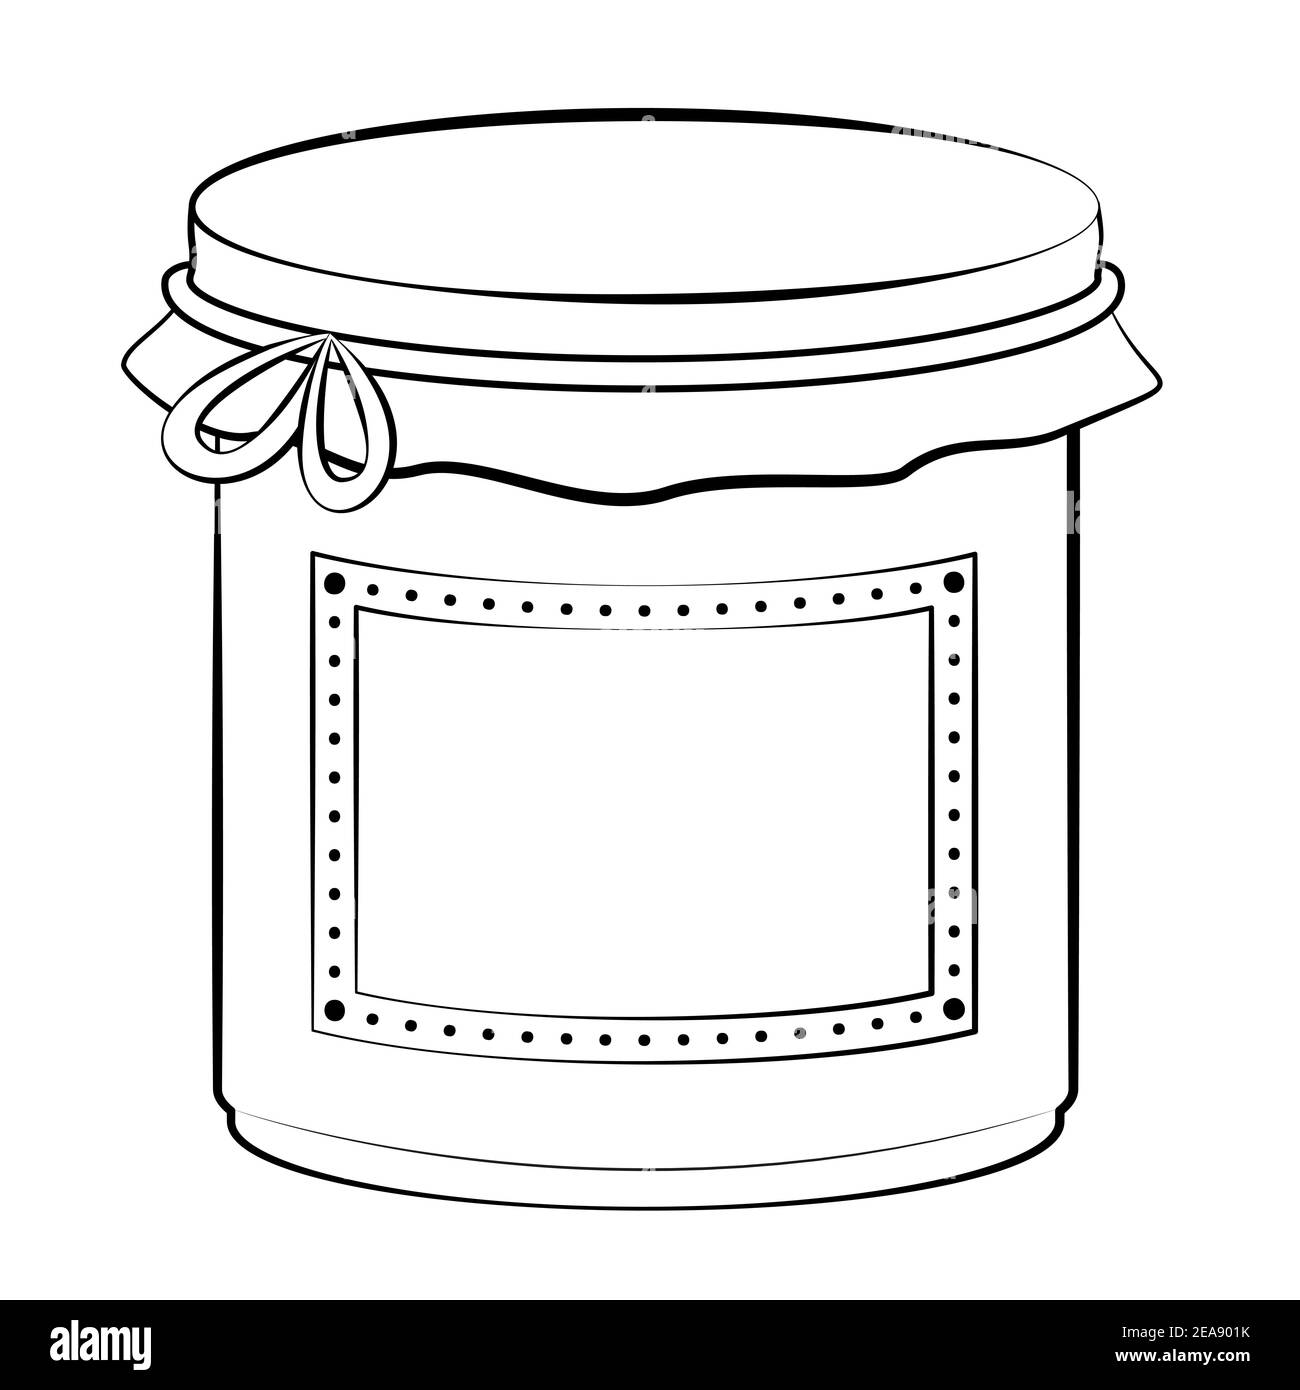 Jam jar screw glass with blank label, outline comic style illustration on white background, to be colored. Stock Photo